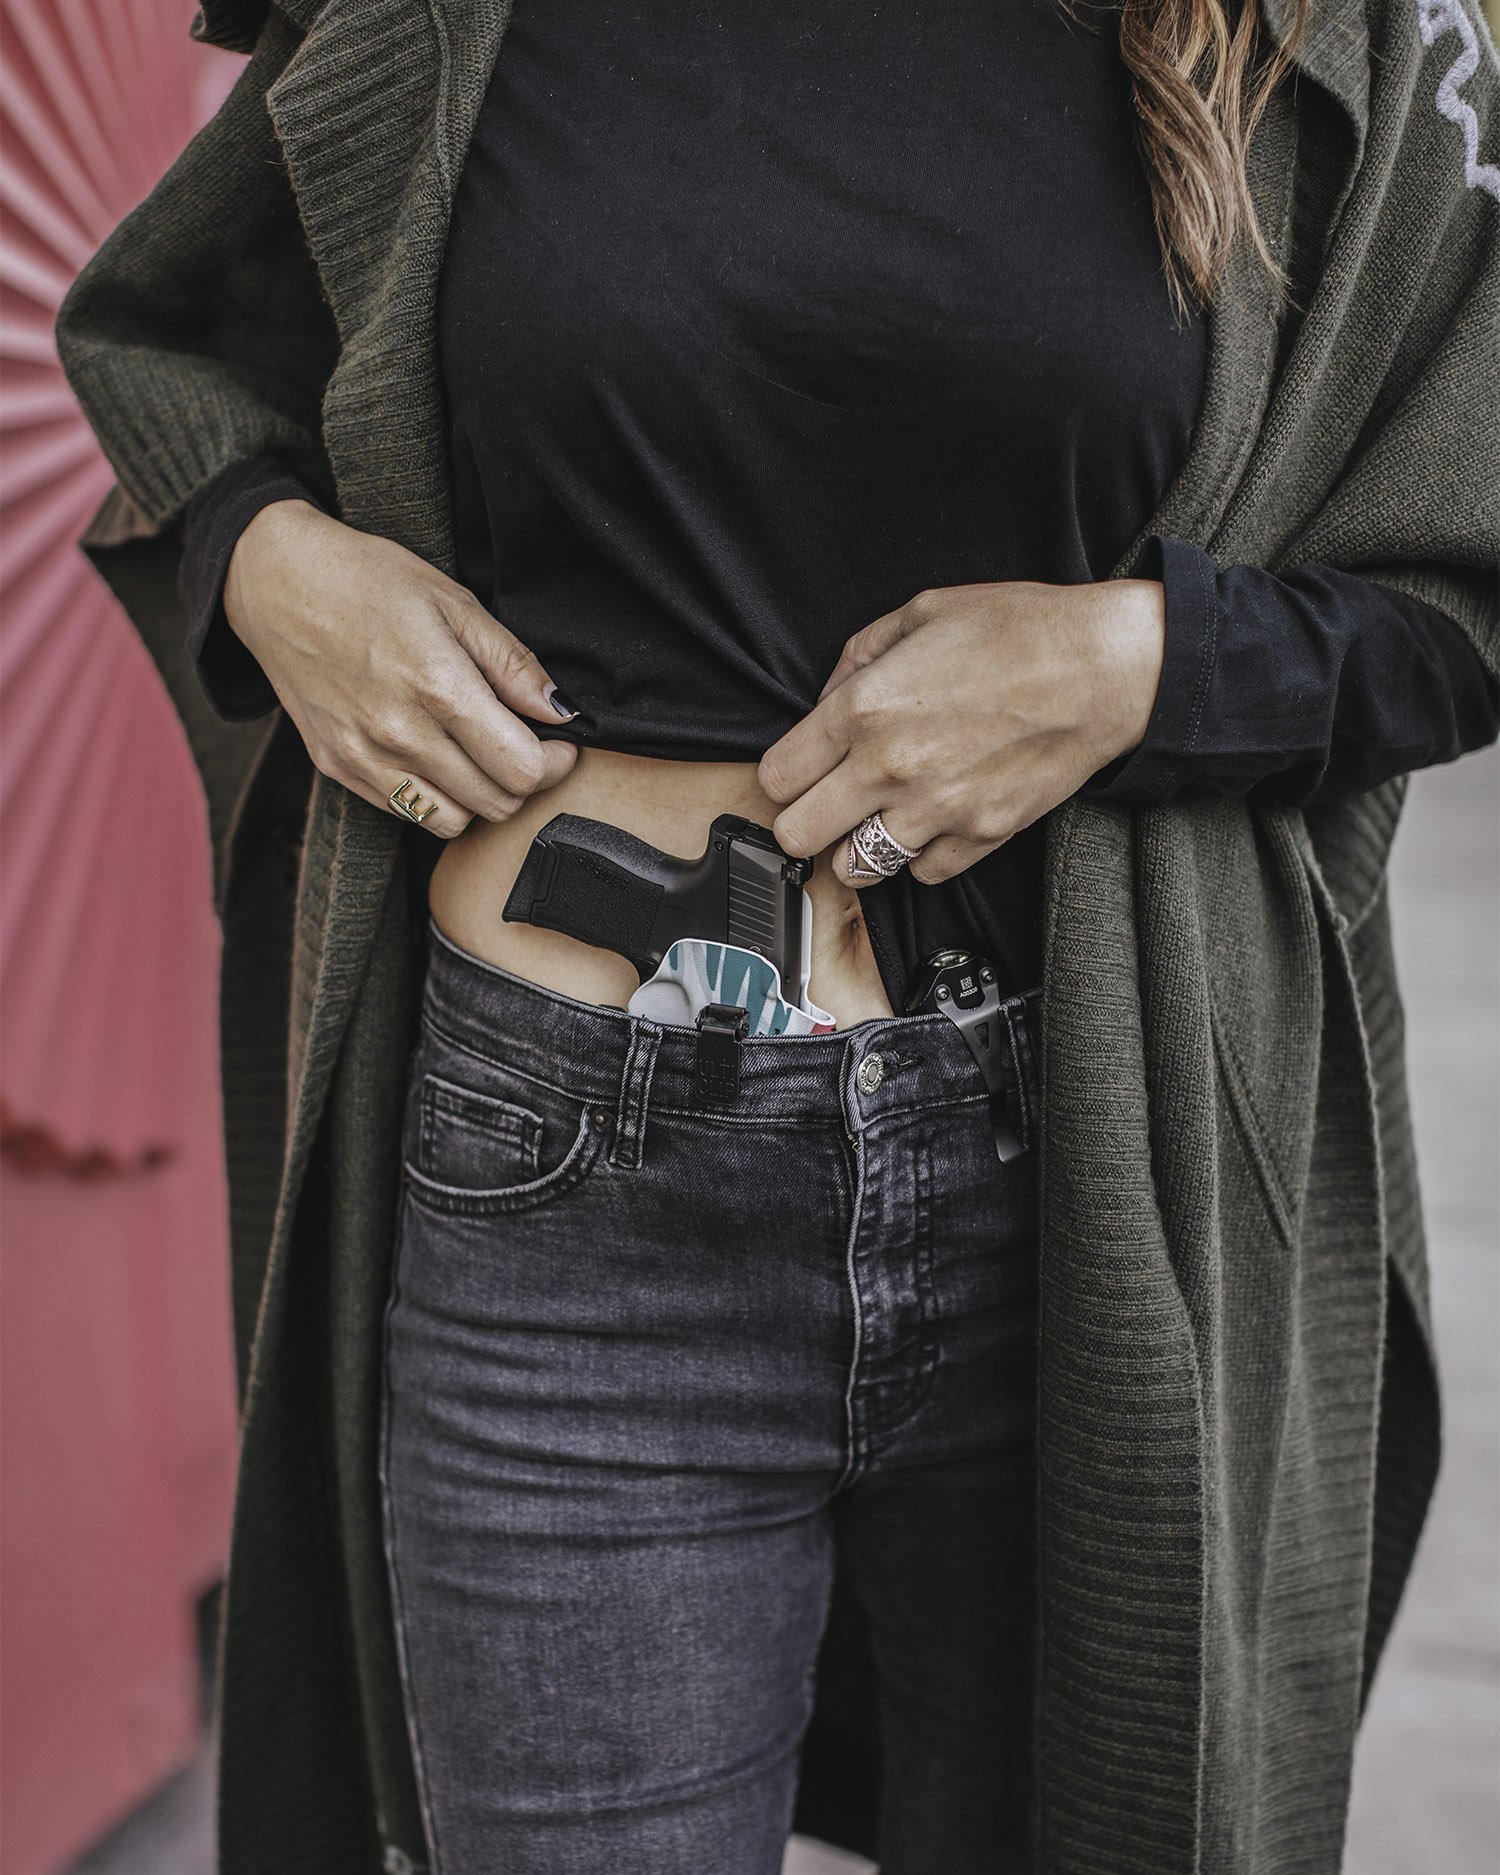 Concealed Carry Outfit, Concealed Tips for Women